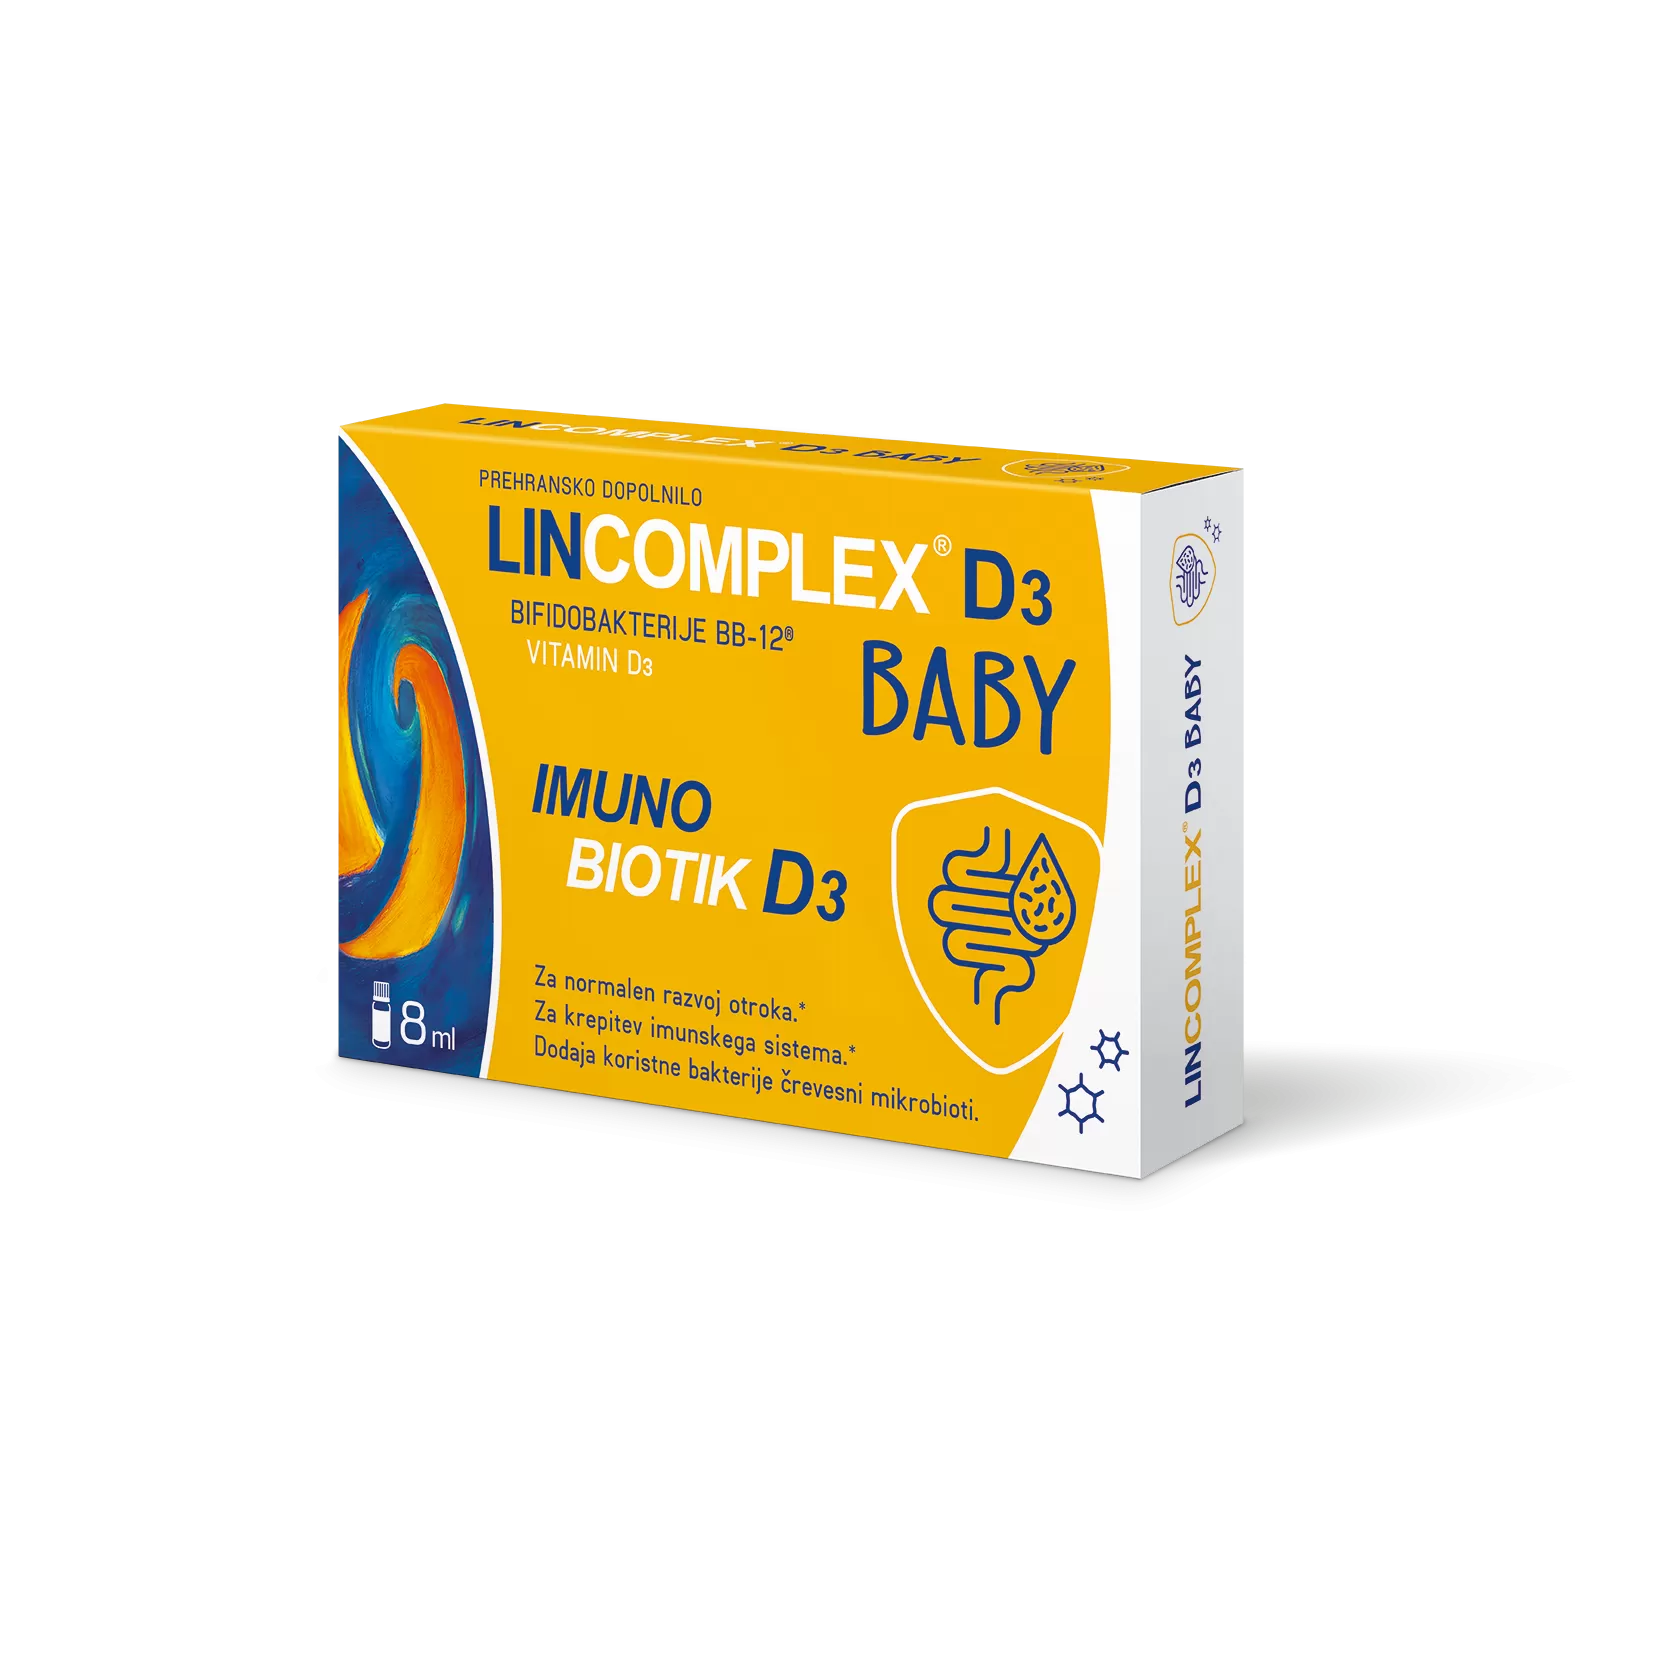 Lincomplex D3 BABY